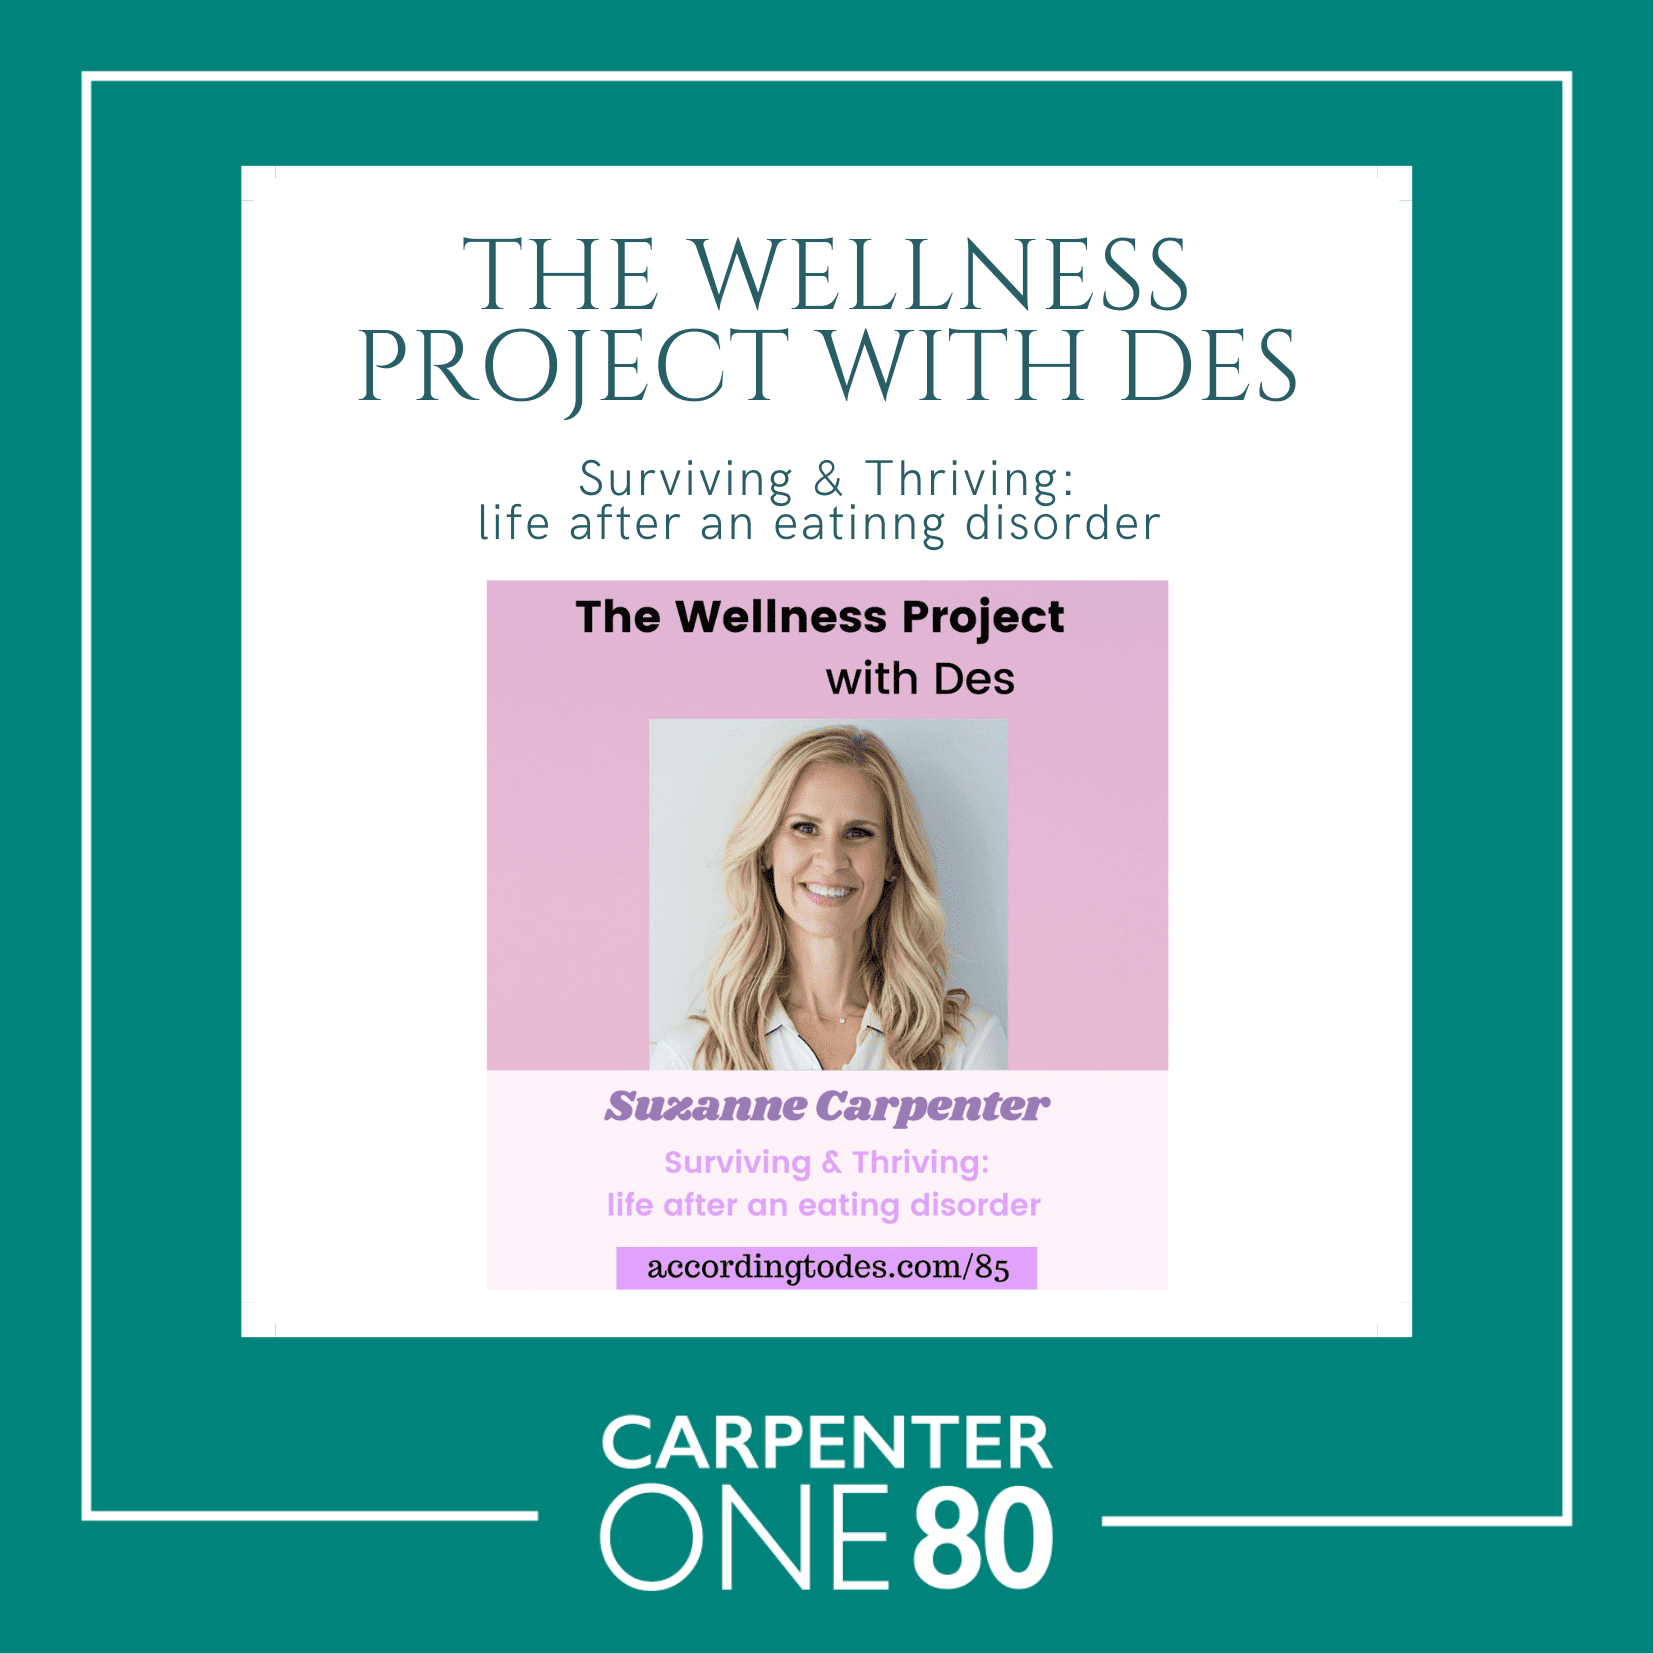 The Wellness Project with Des tile